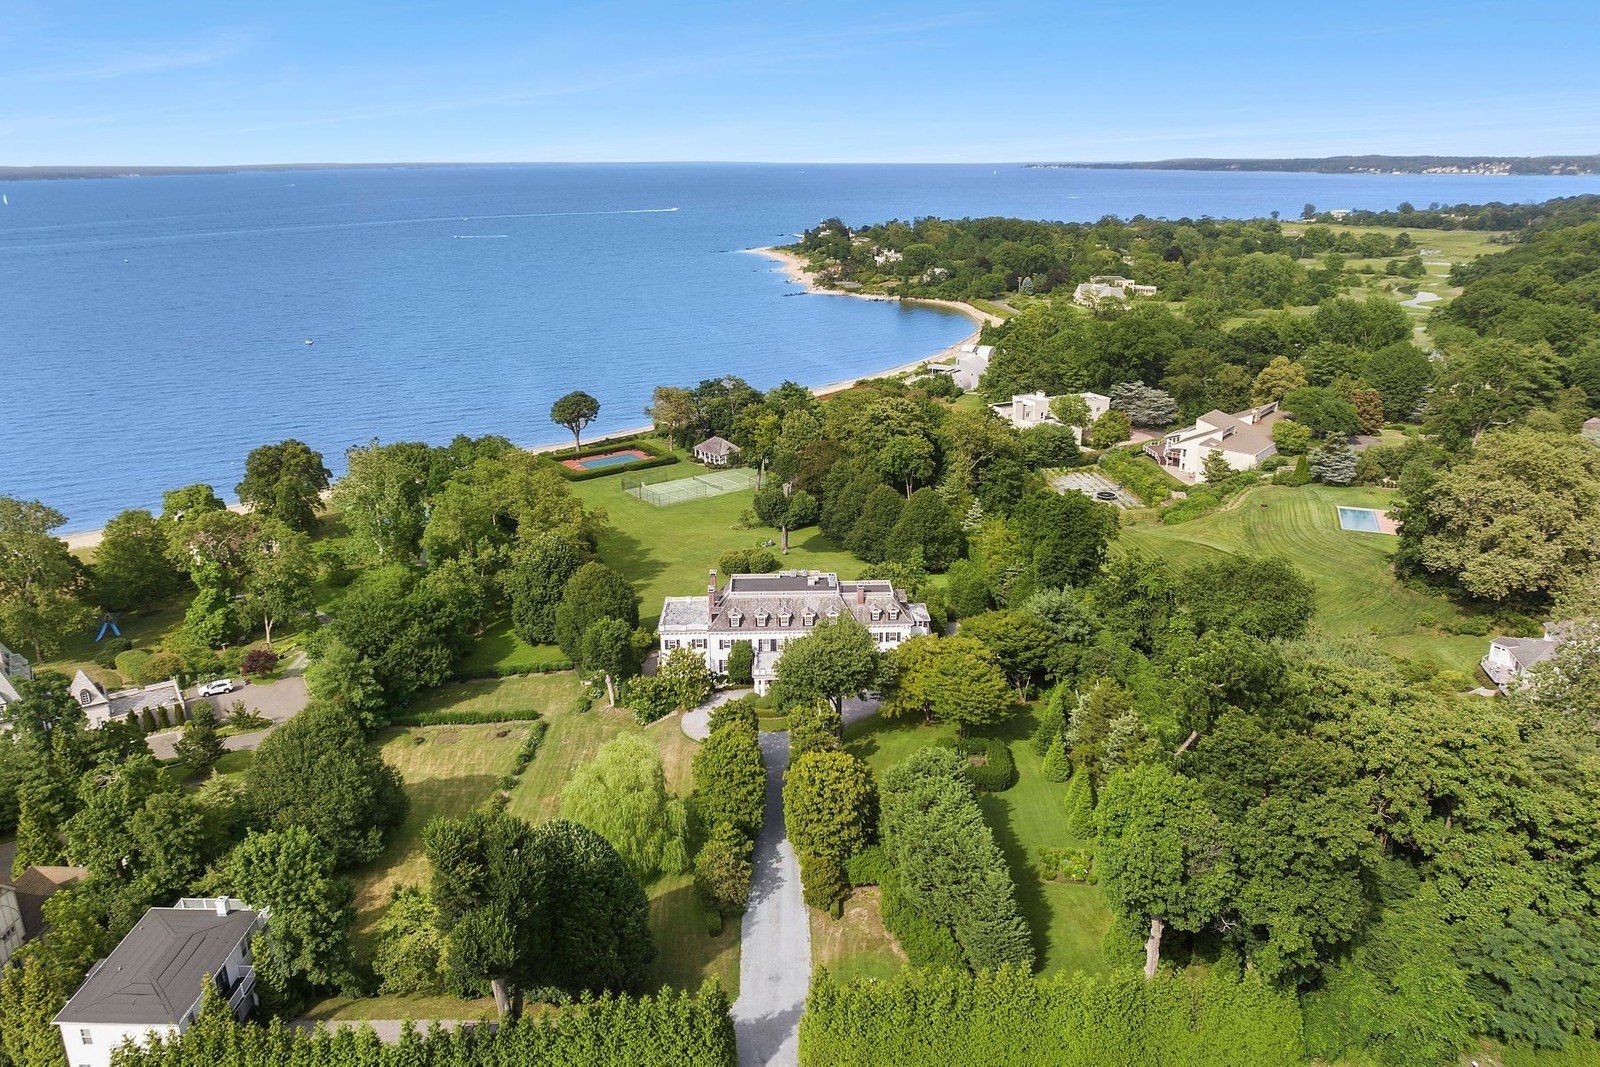 Francis York Daniel Gale Sothebys The Lindens Timeless Long Island Estate Once Home to the Famed Bootleggers, the Vanderbilts, and Rockstars 23.jpeg